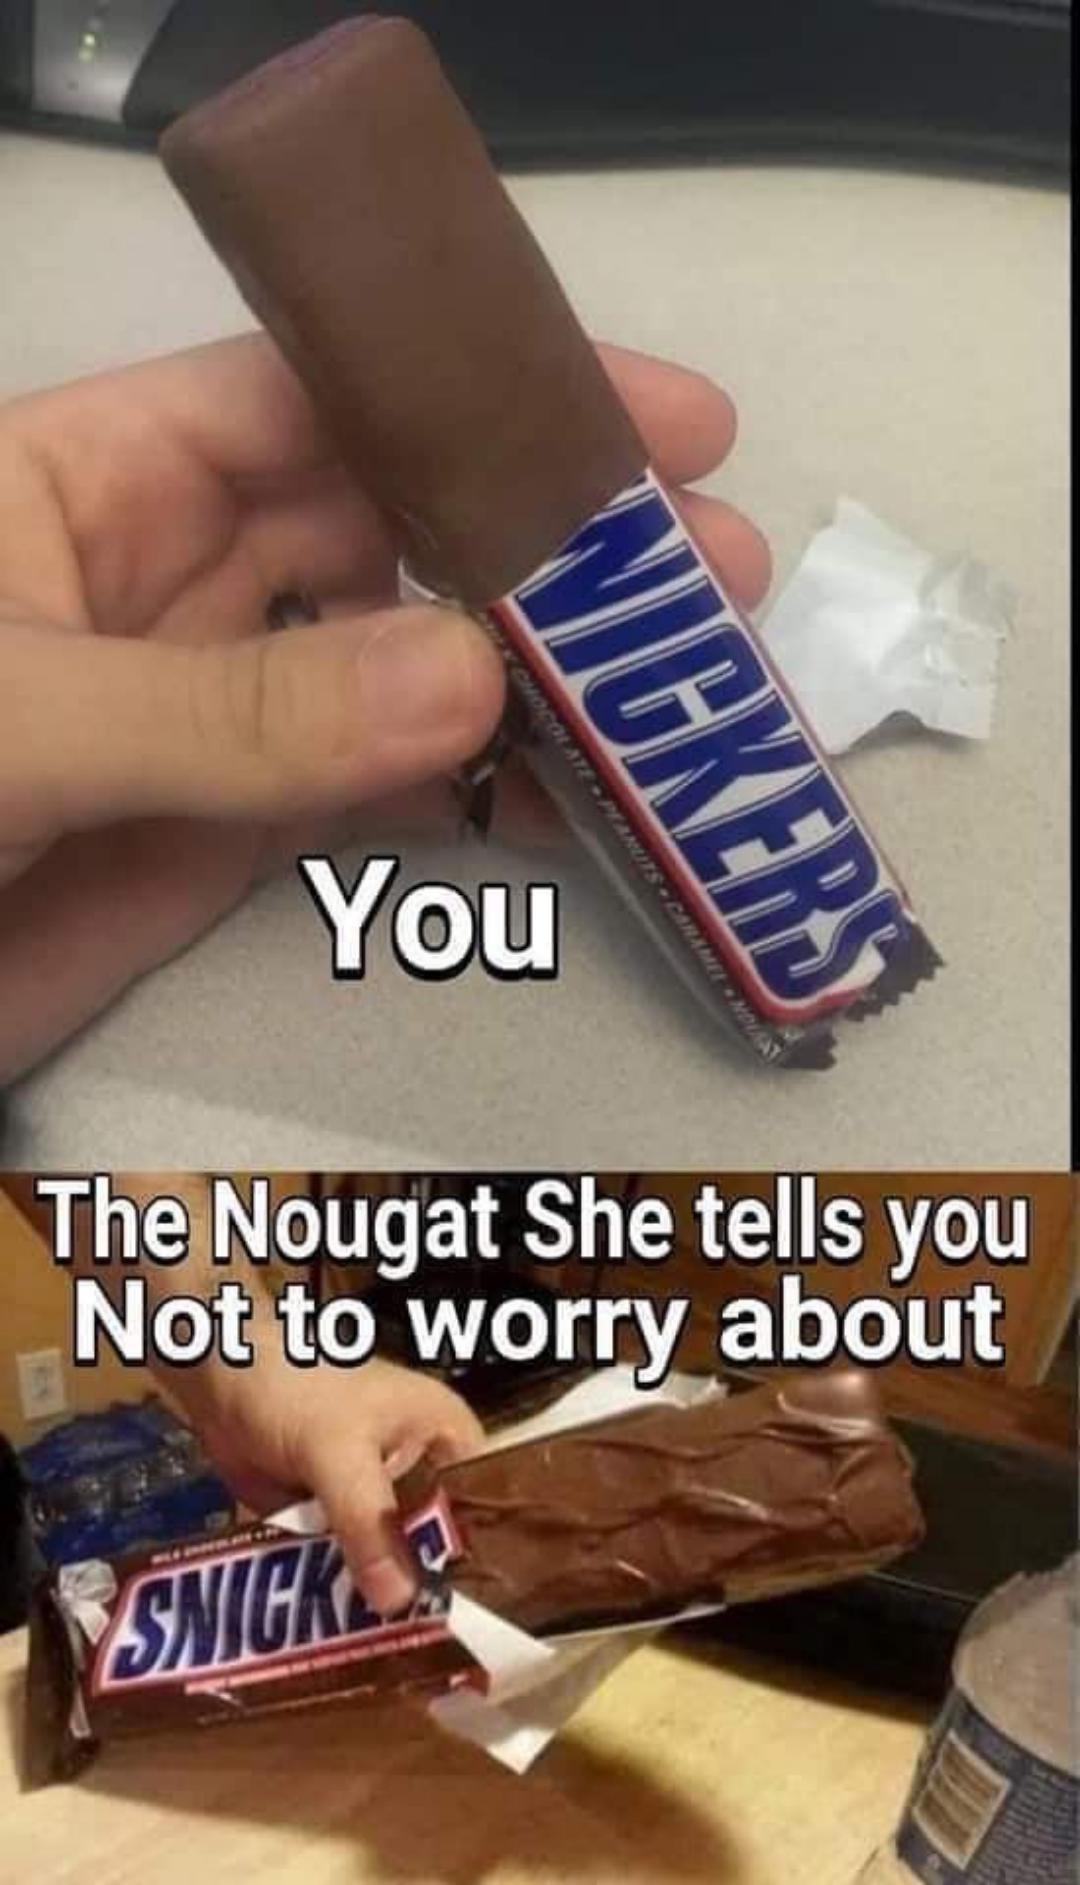 dank memes - funny memes - Snickers - You Vickers The Nougat She tells you Not to worry about Snicki